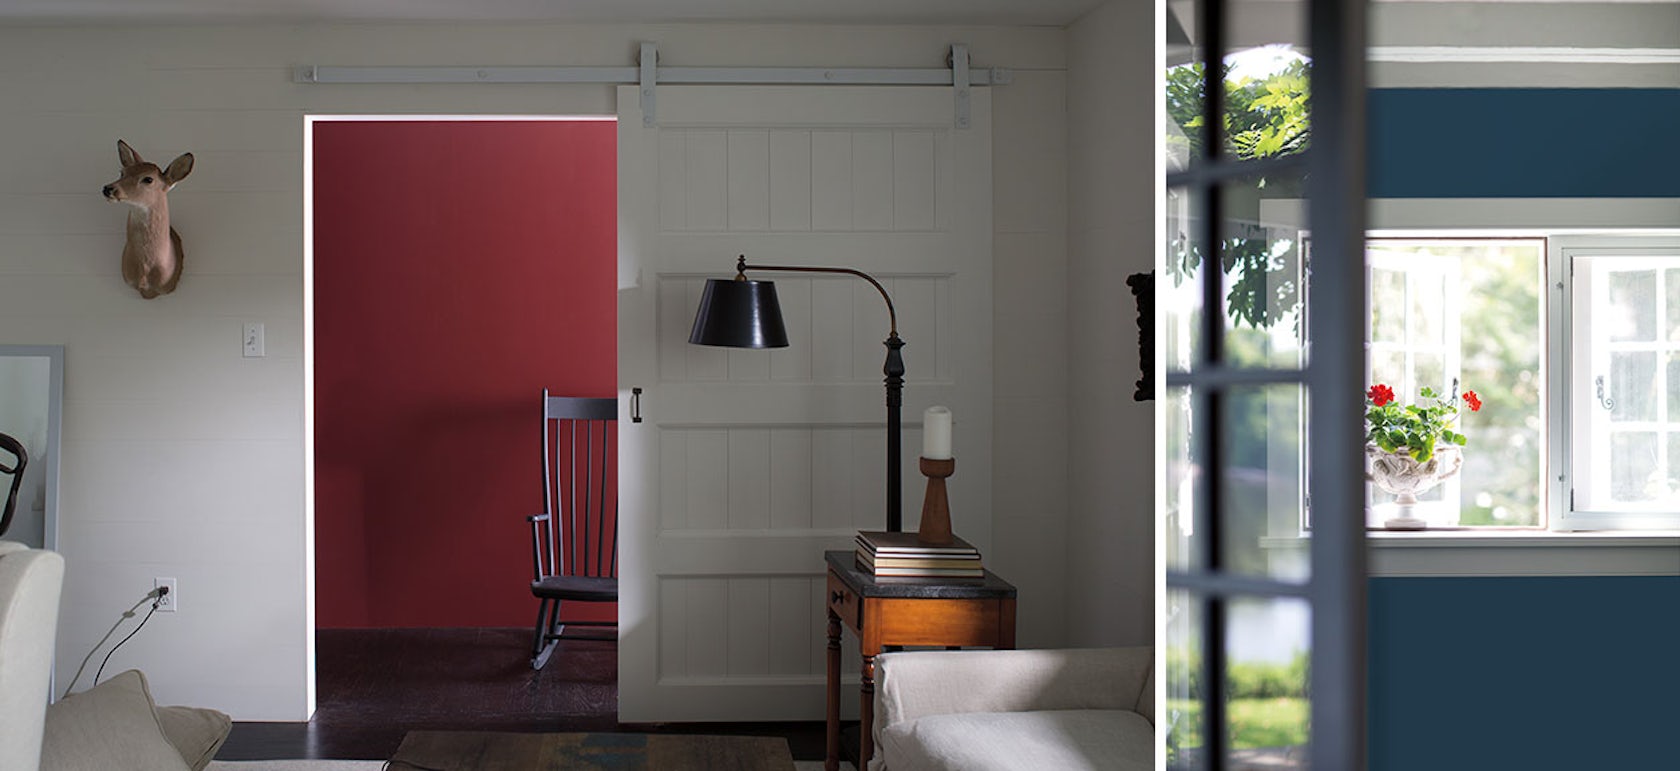 The 2017 Benjamin Moore Color Of The Year Is Architizer Journal